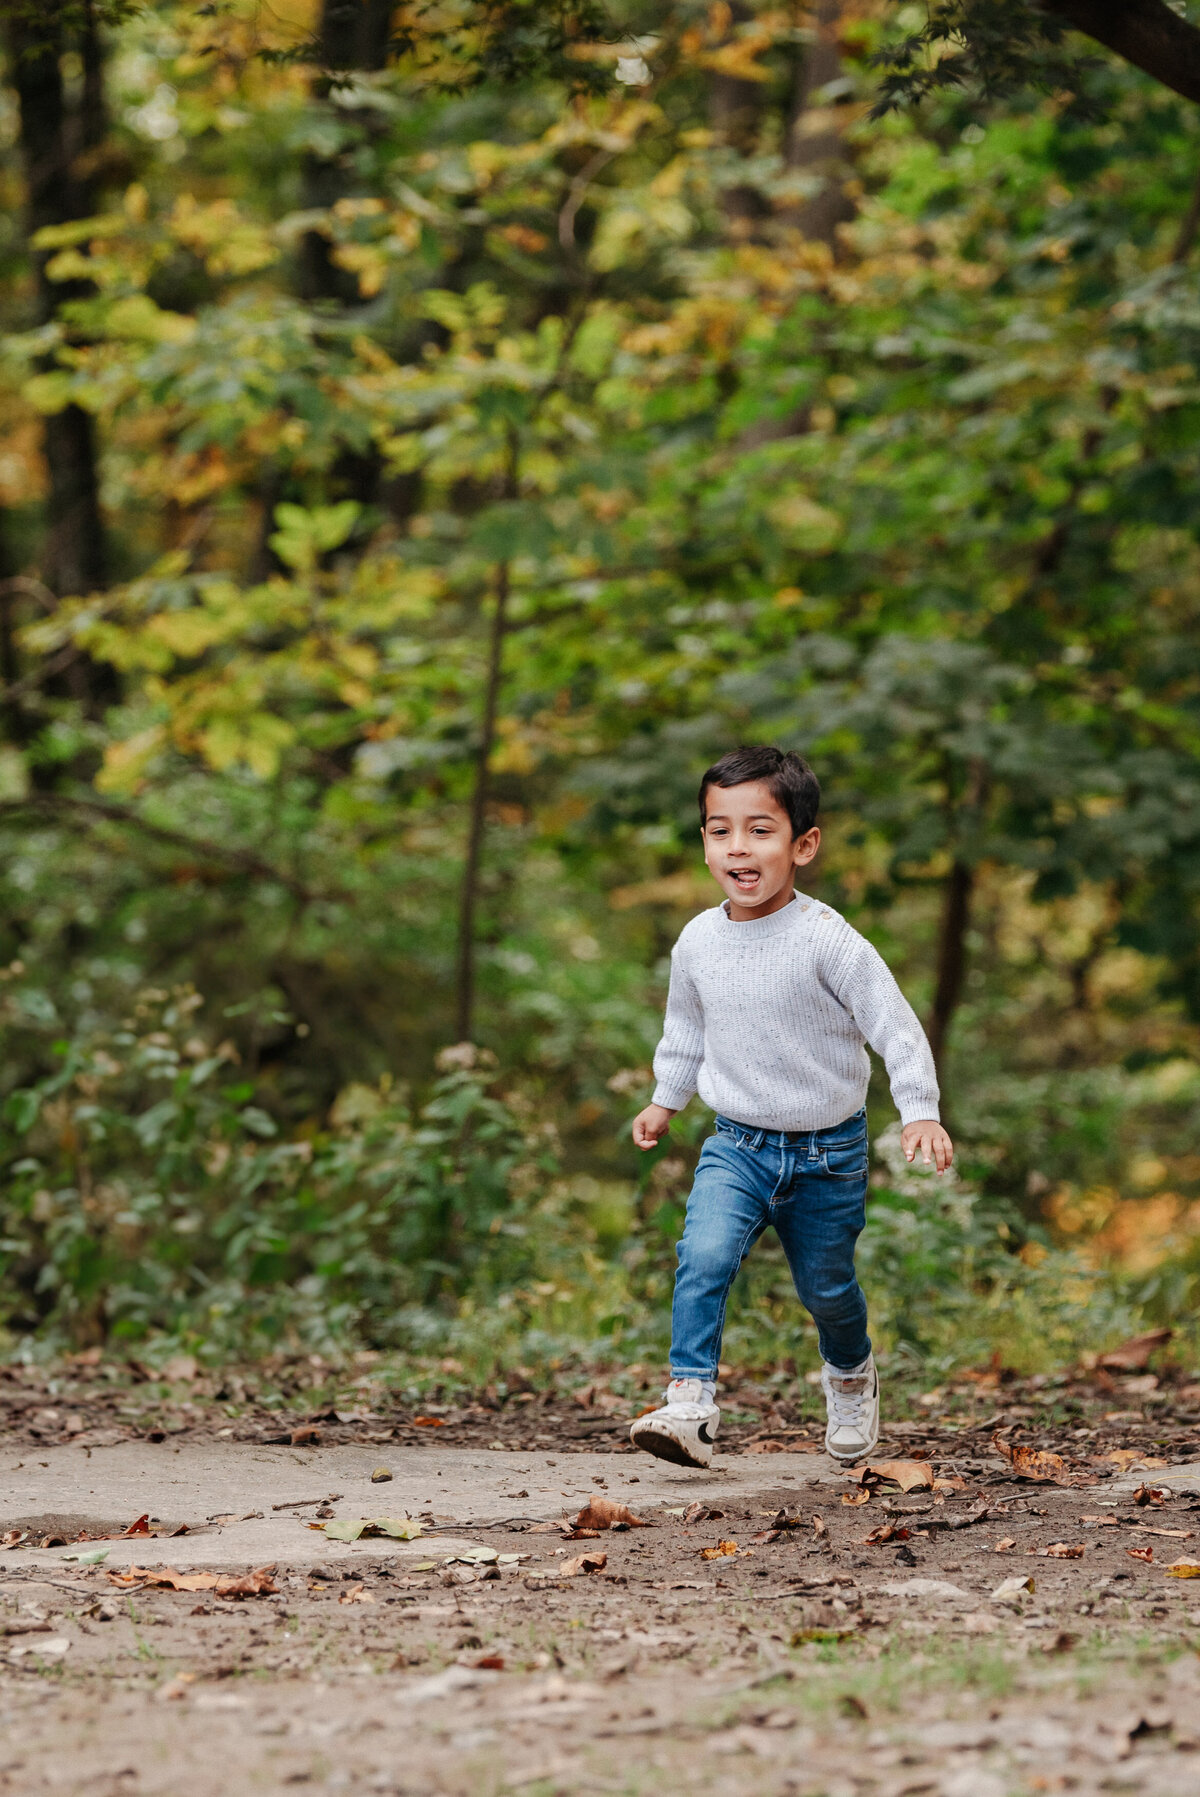 jobryan-photography-family-photoshoot-rye-westchester-outdoors-fall-nature-photograher_8